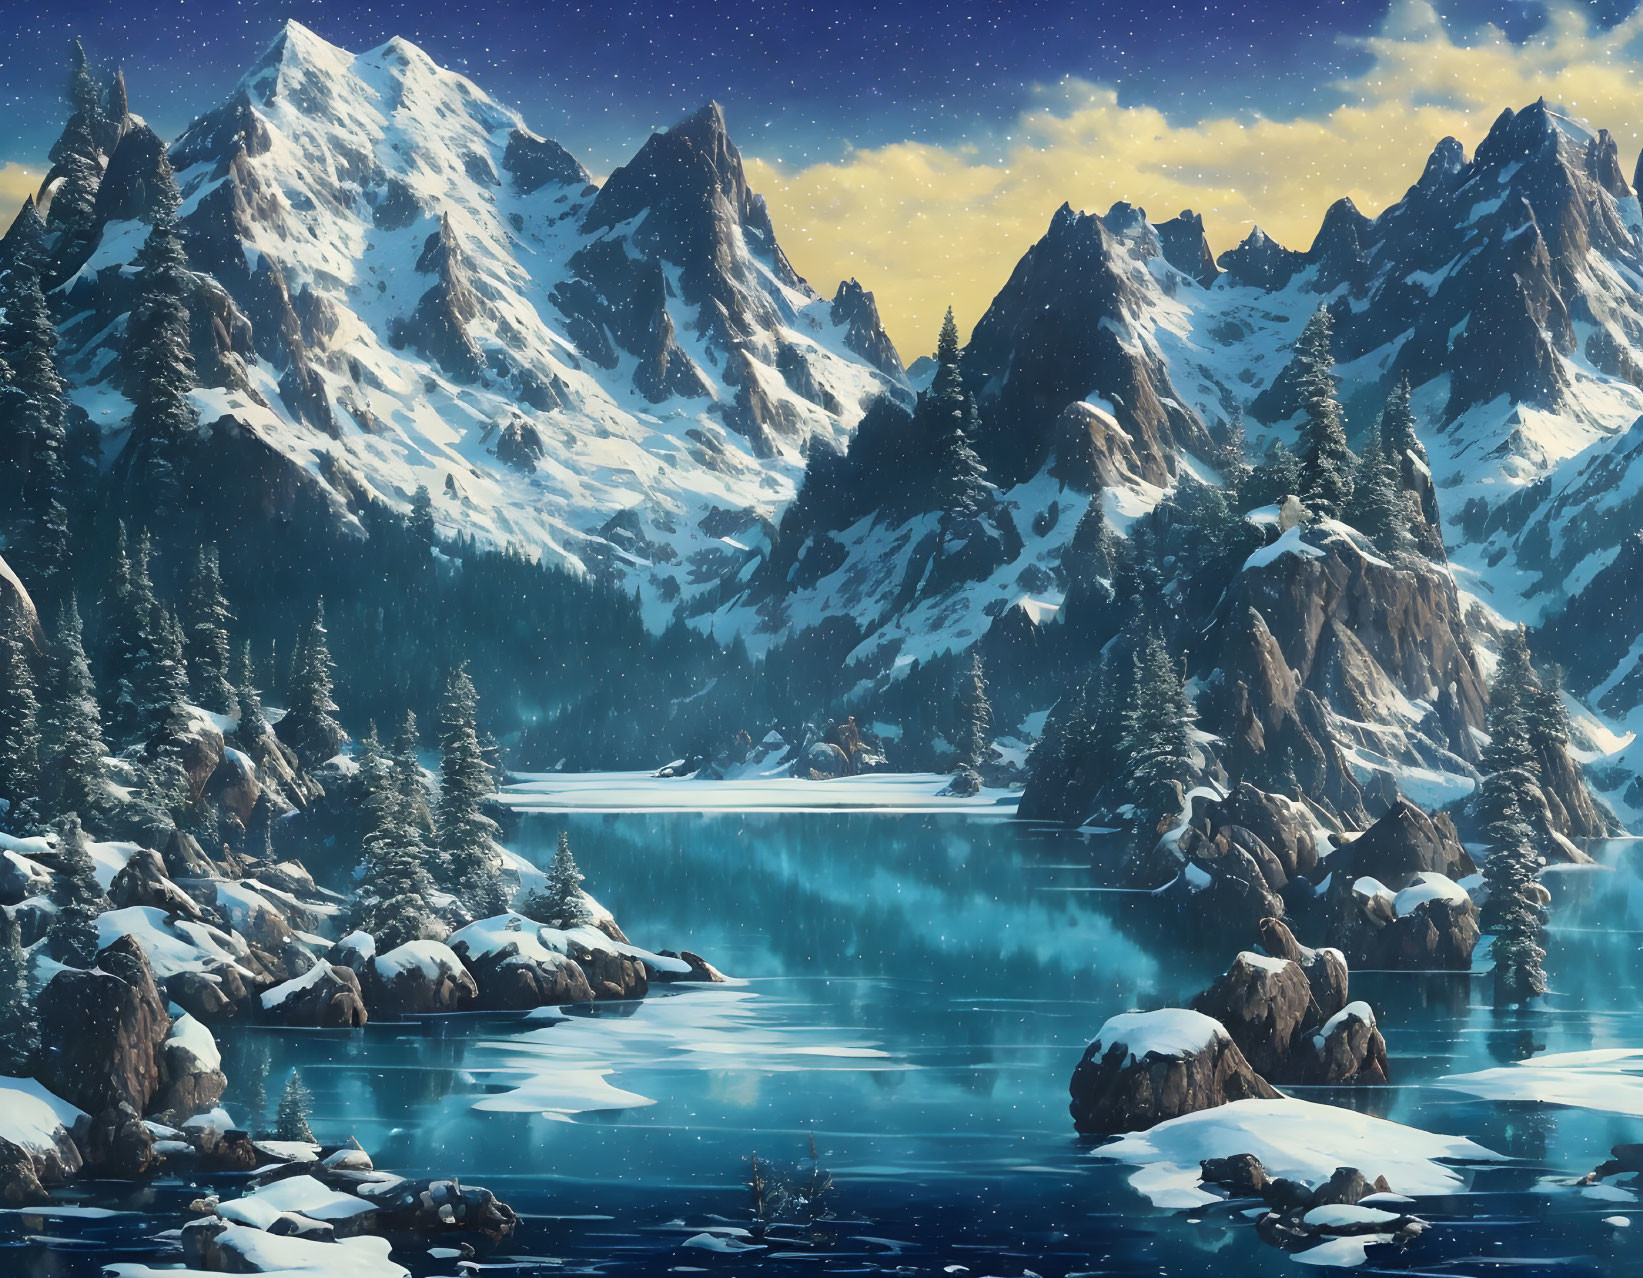 Snowy Mountain Winter Landscape with Frozen Lake and Starry Sky